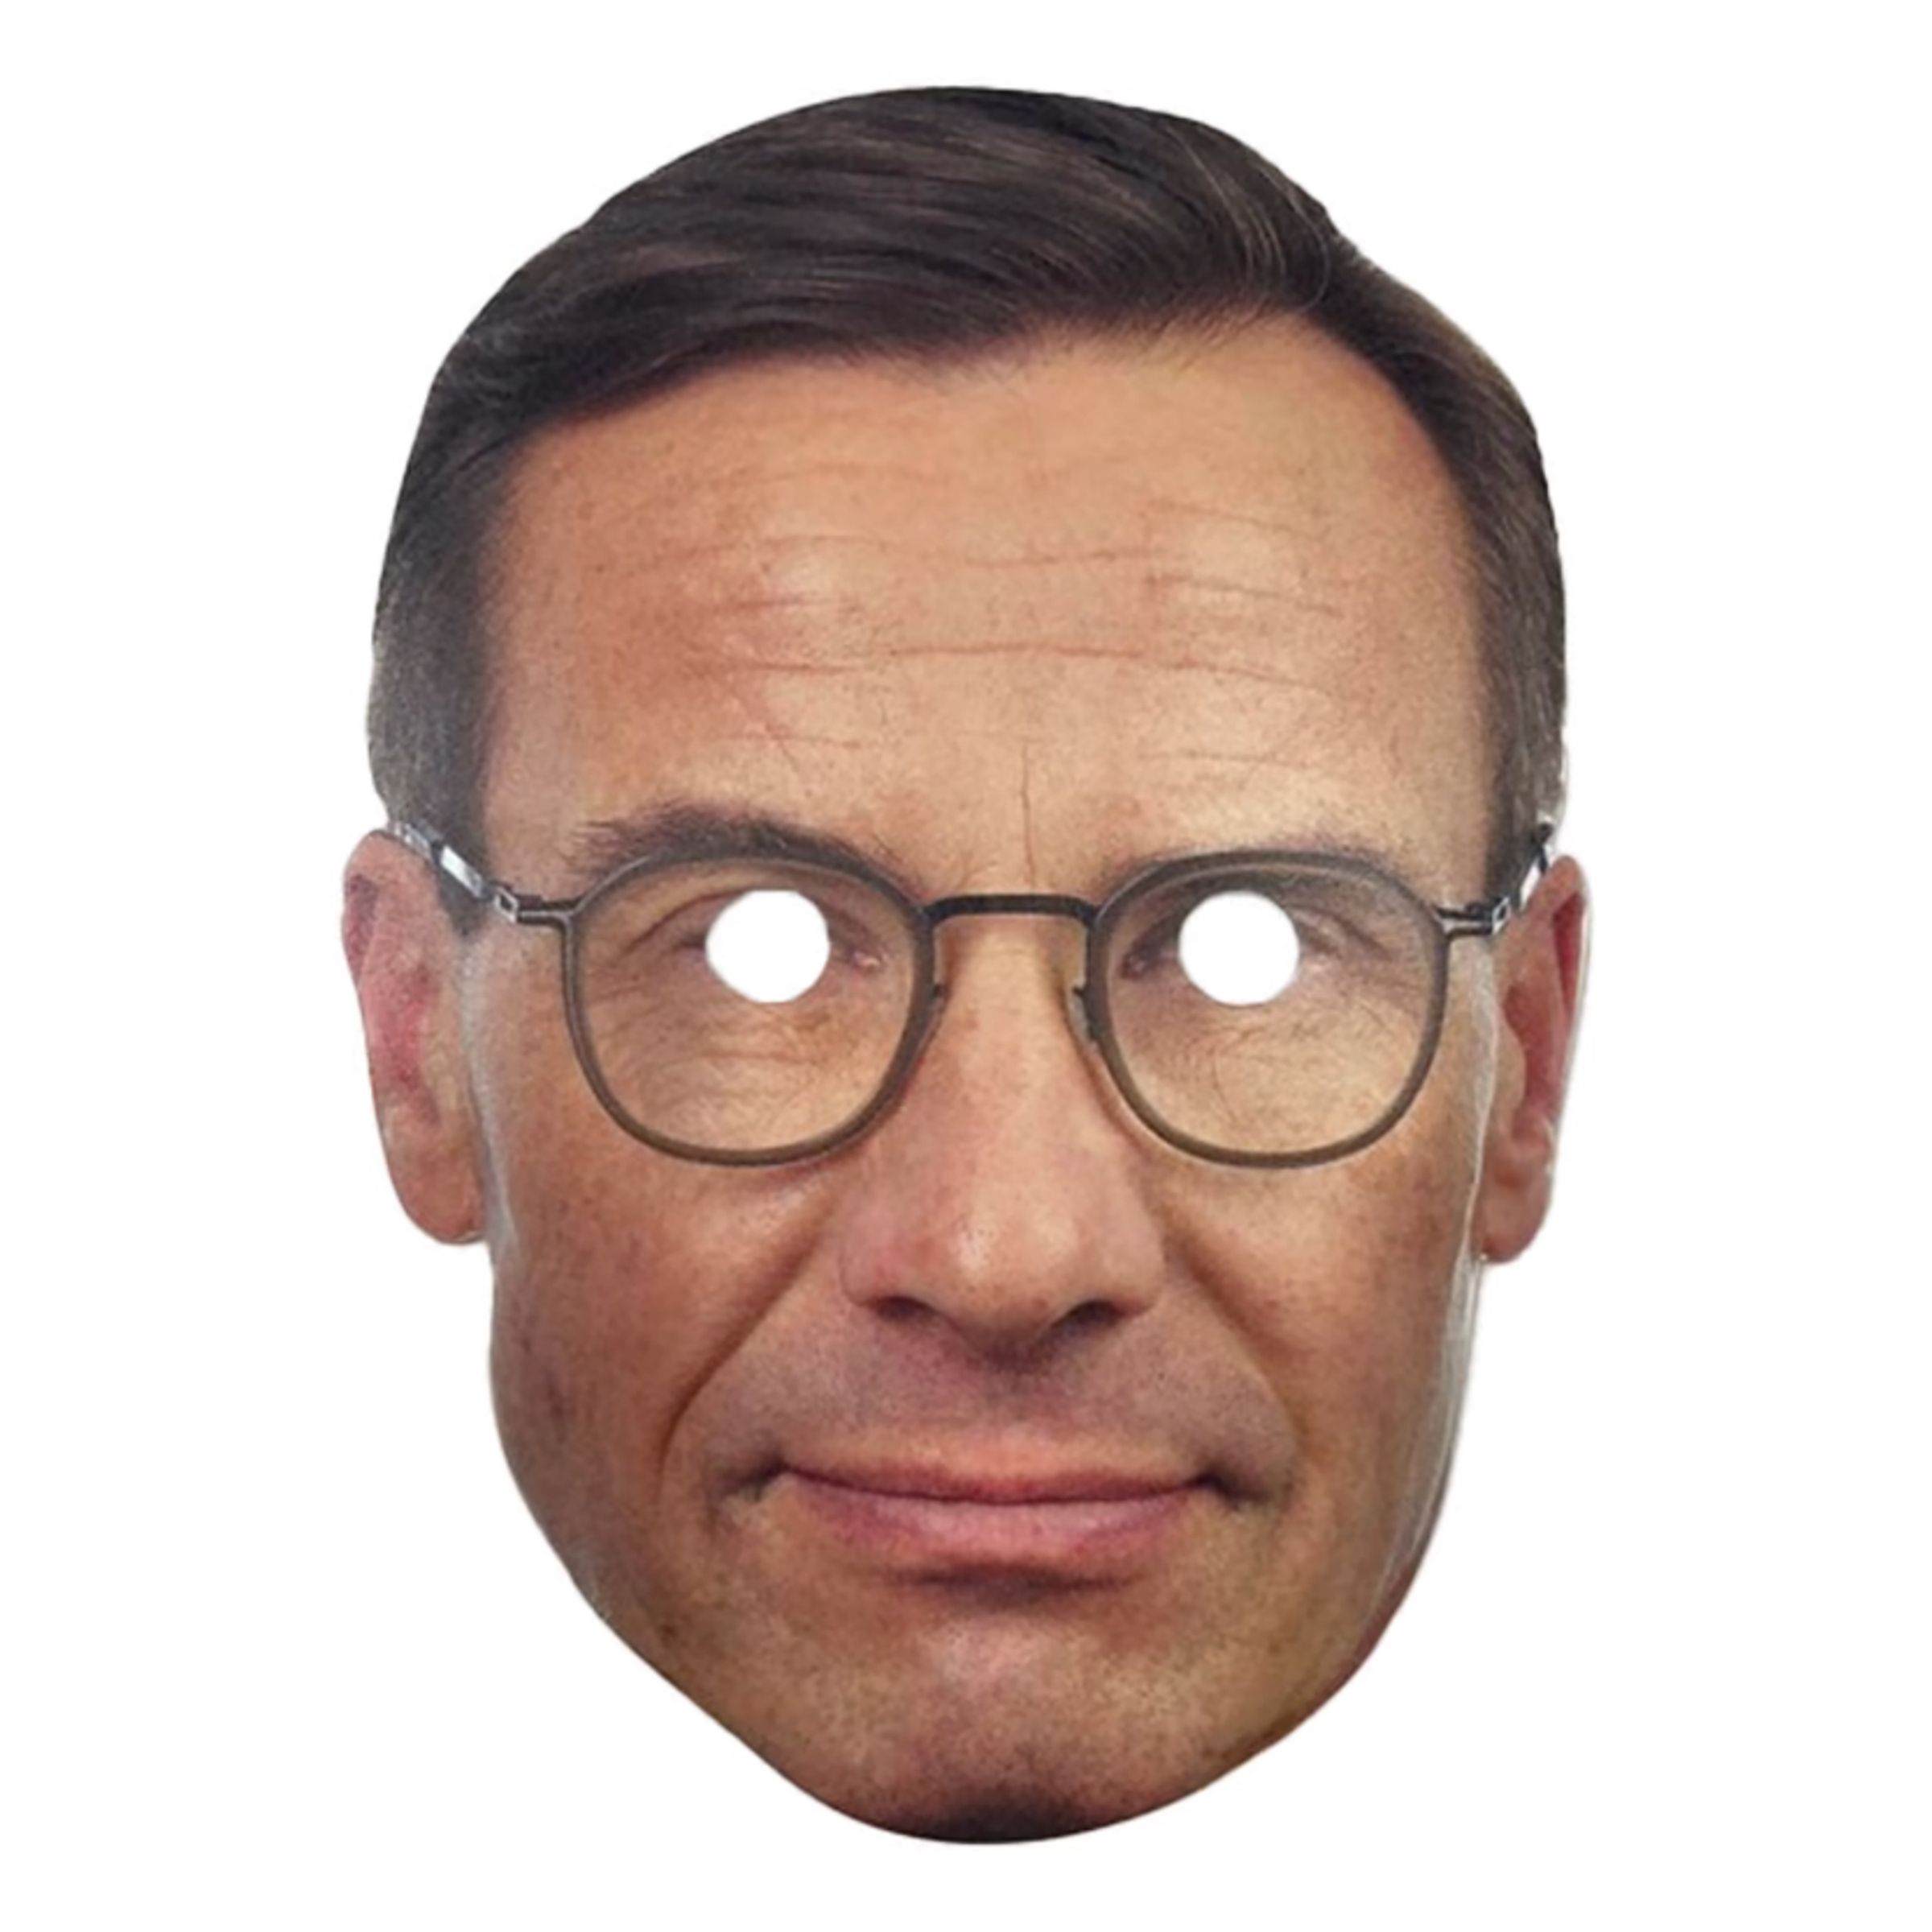 Ulf Kristersson Pappmask - One size